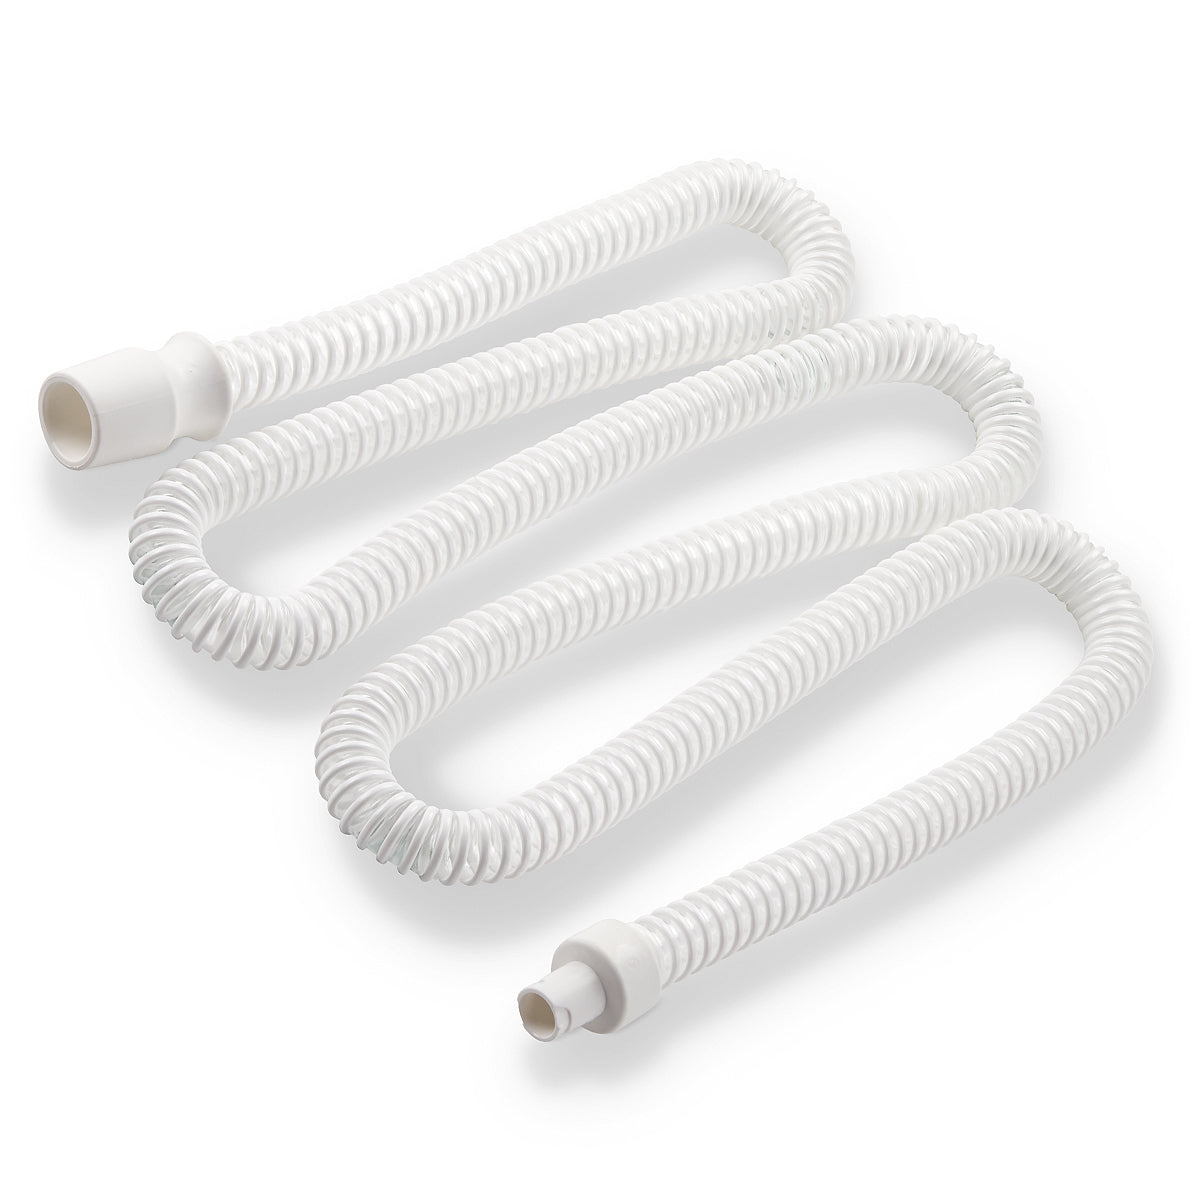 AirFlex Hose for Transcend Micro Portable CPAP Machines (6-Foot)